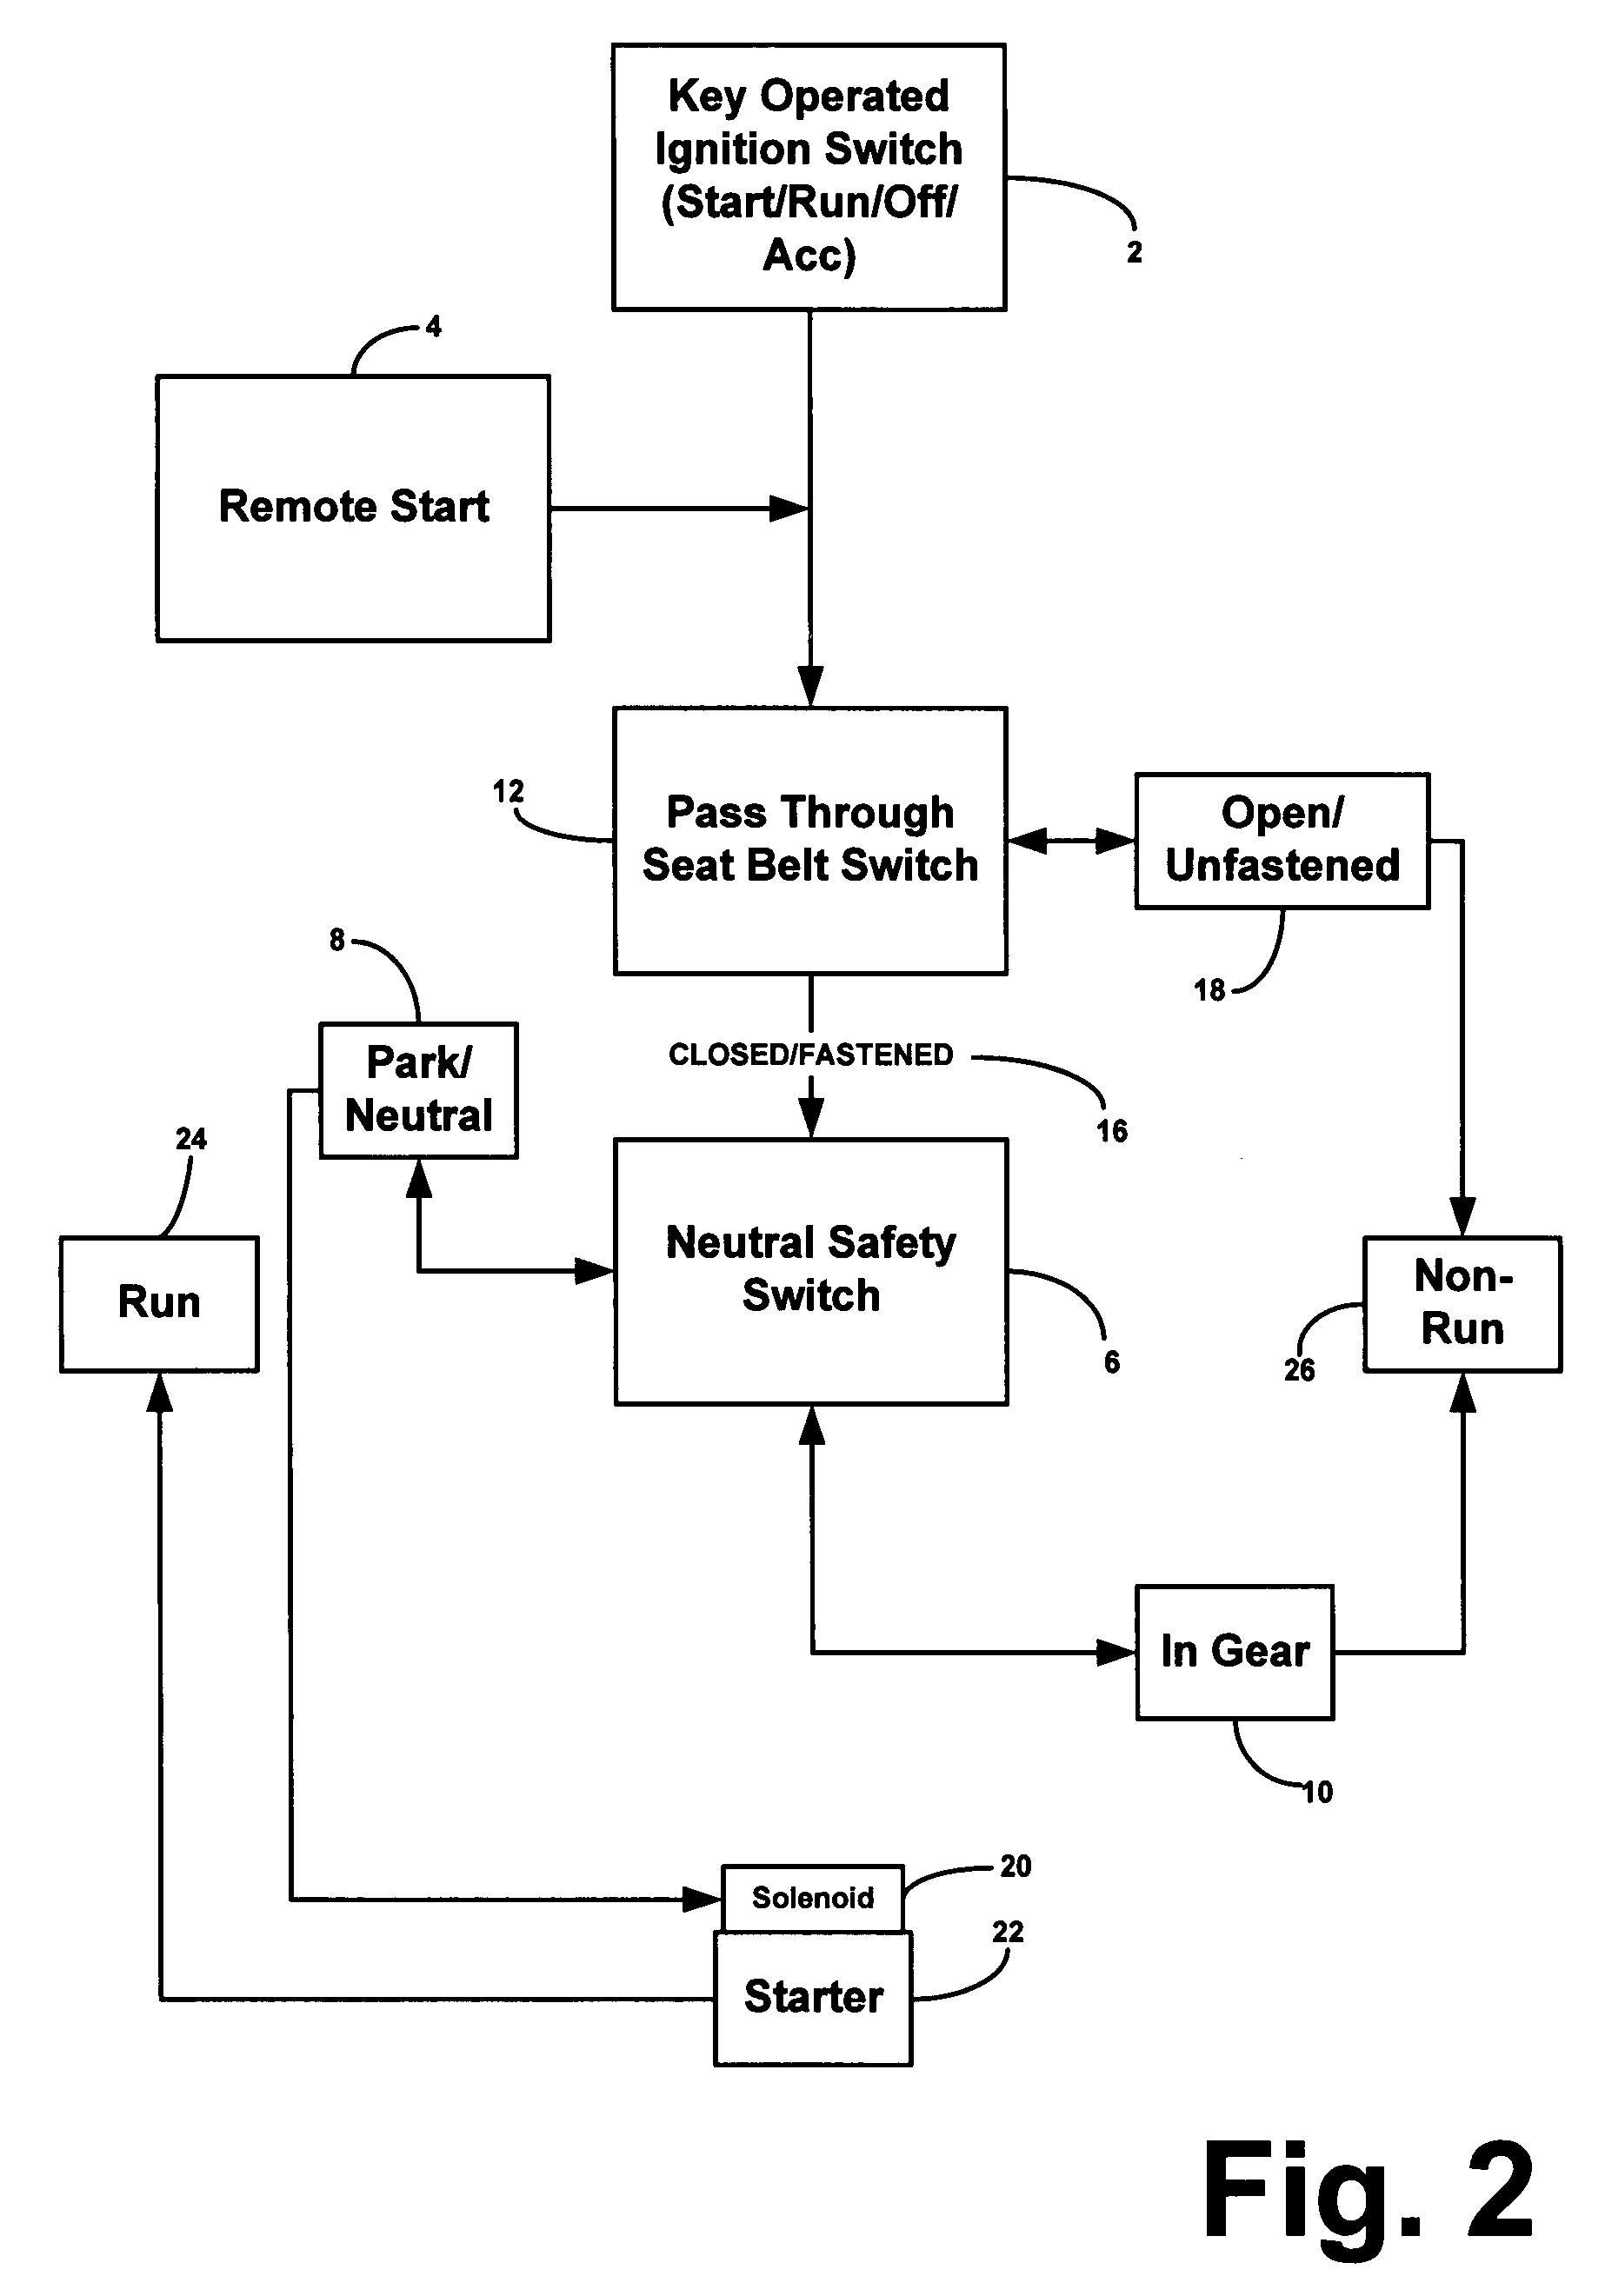 Automobile anti-theft and start control device to encourage wearing of seatbelts